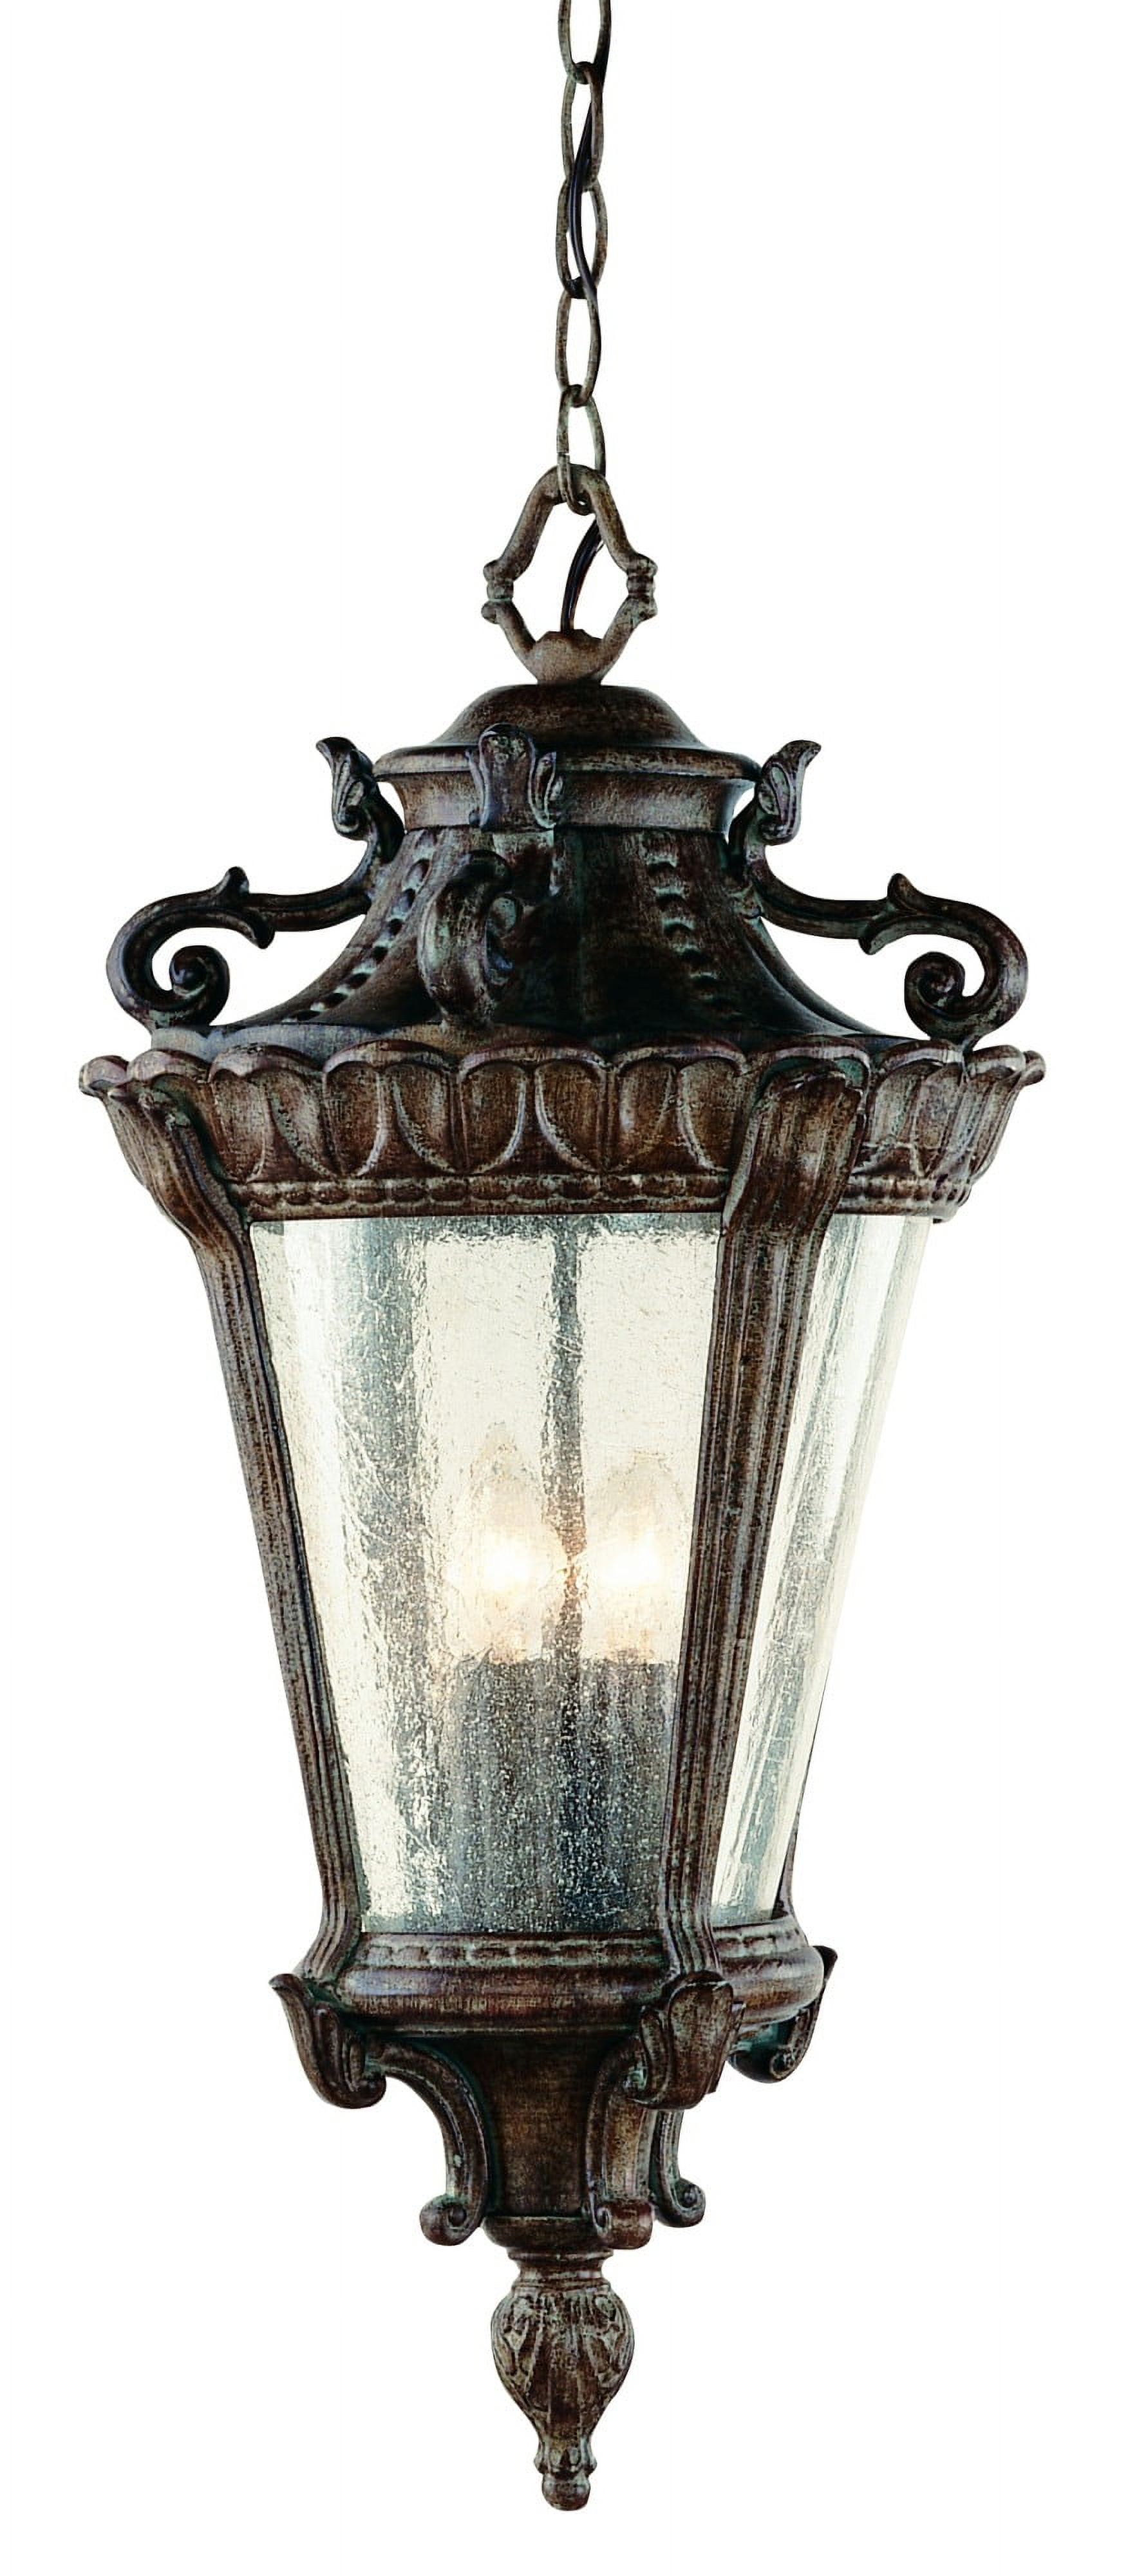 Trans Globe Lighting 4843 Patina Four Light Up Lighting Outdoor Pendant From The Outdoor - image 1 of 2